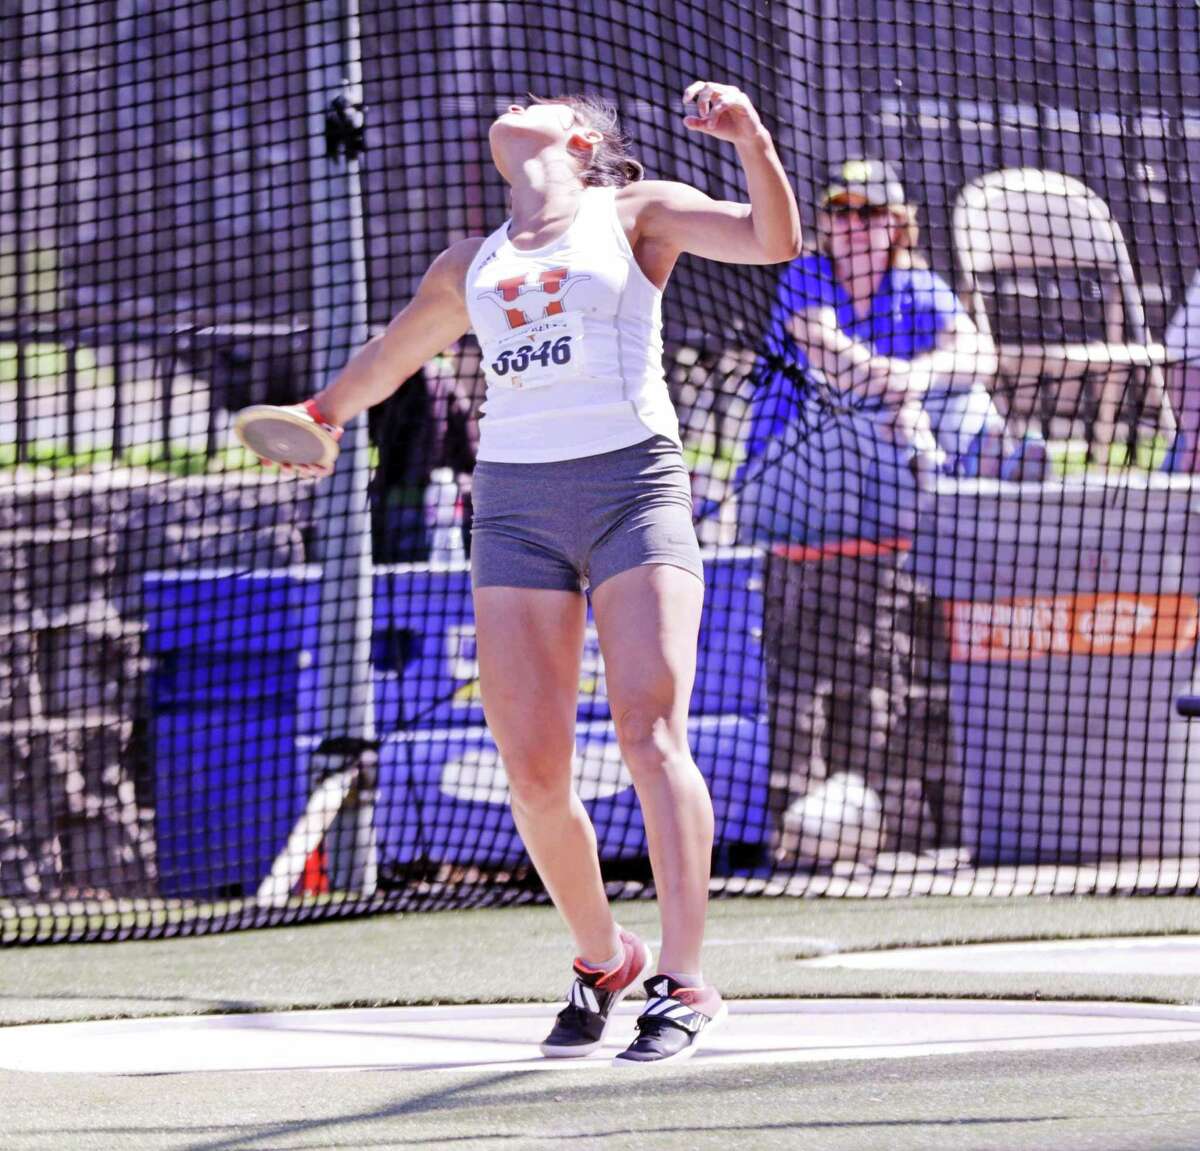 Sadey Rodriguez of United took second place in the discus event on the opening day of the Texas Relays meet on Friday.